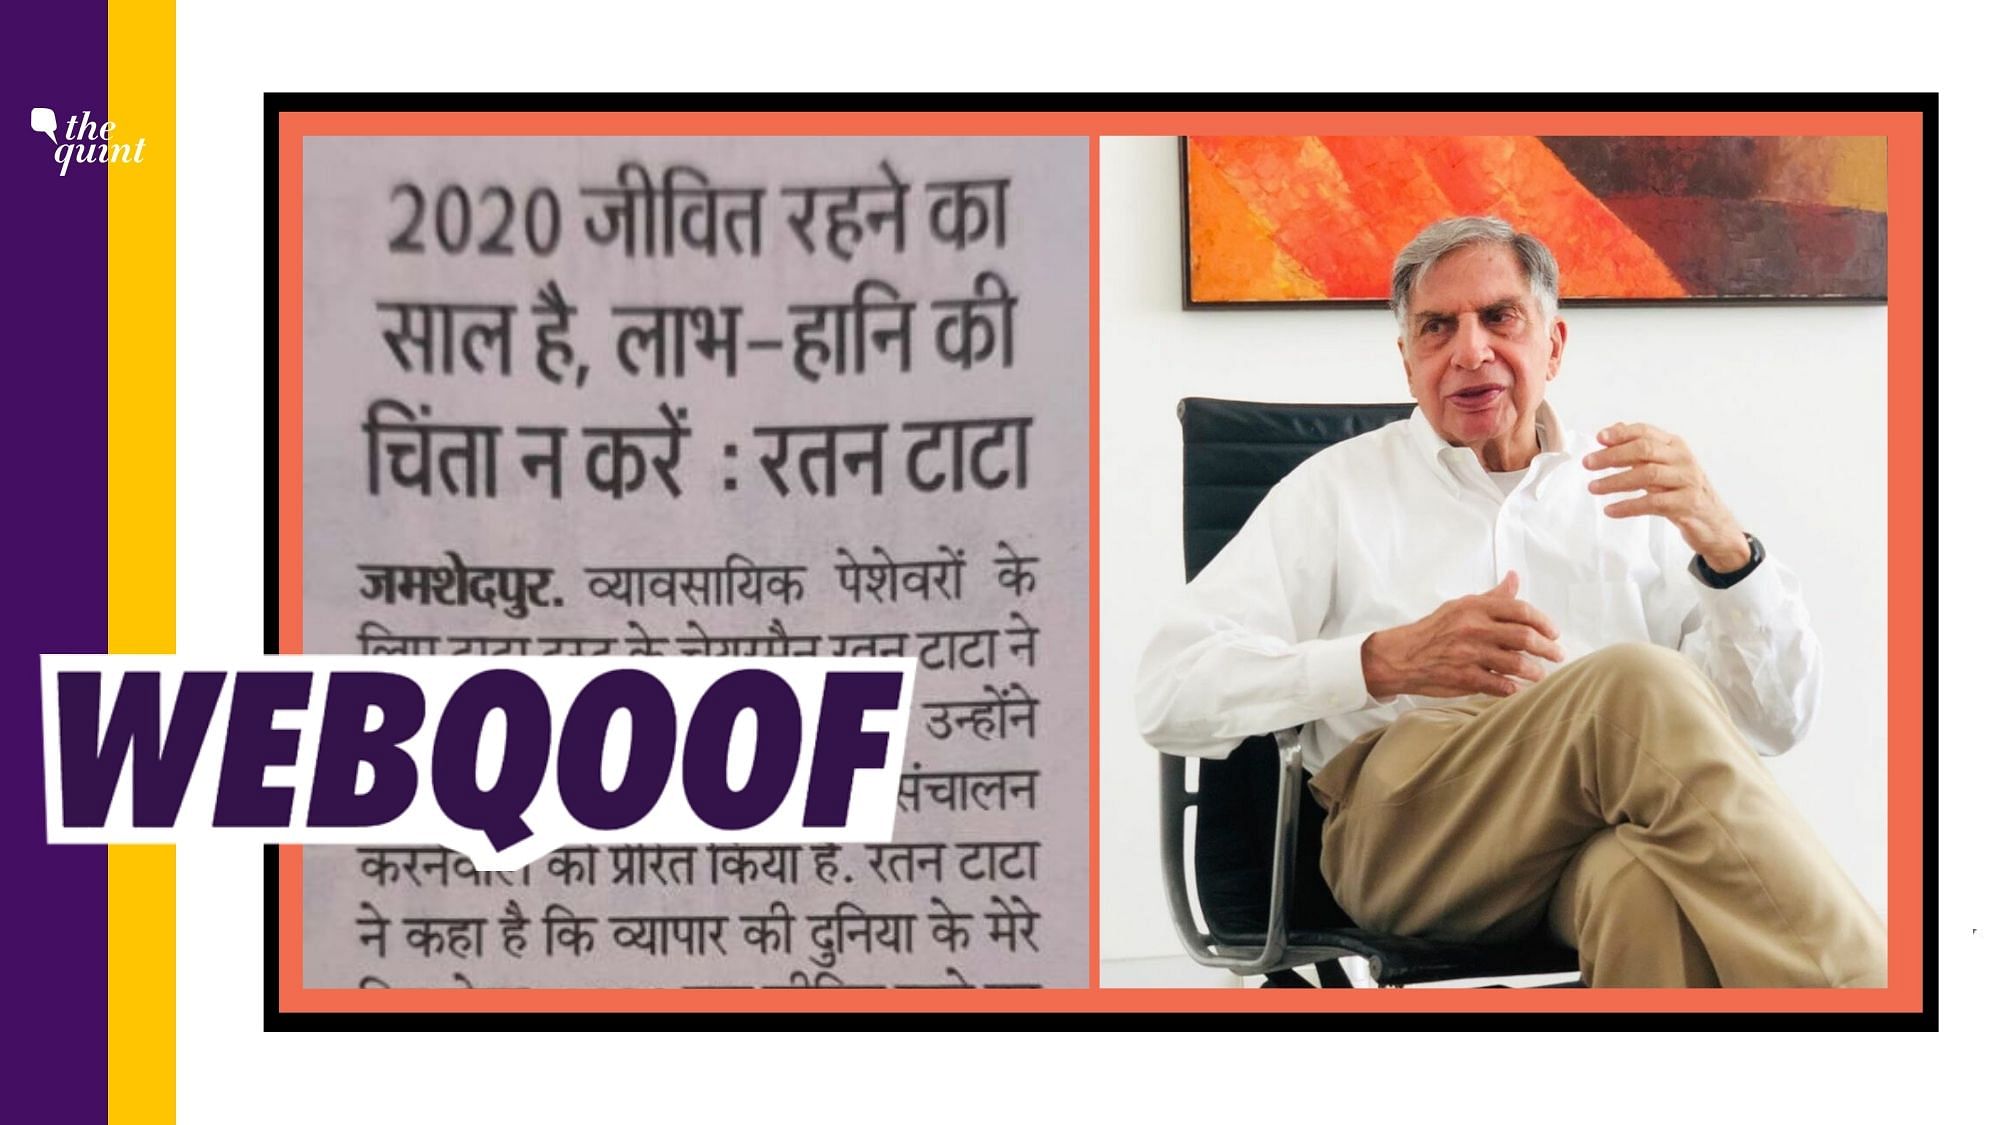 A clipping of the article attributed to Ratan Tata is being widely circulated on all social media platforms including Facebook and Twitter